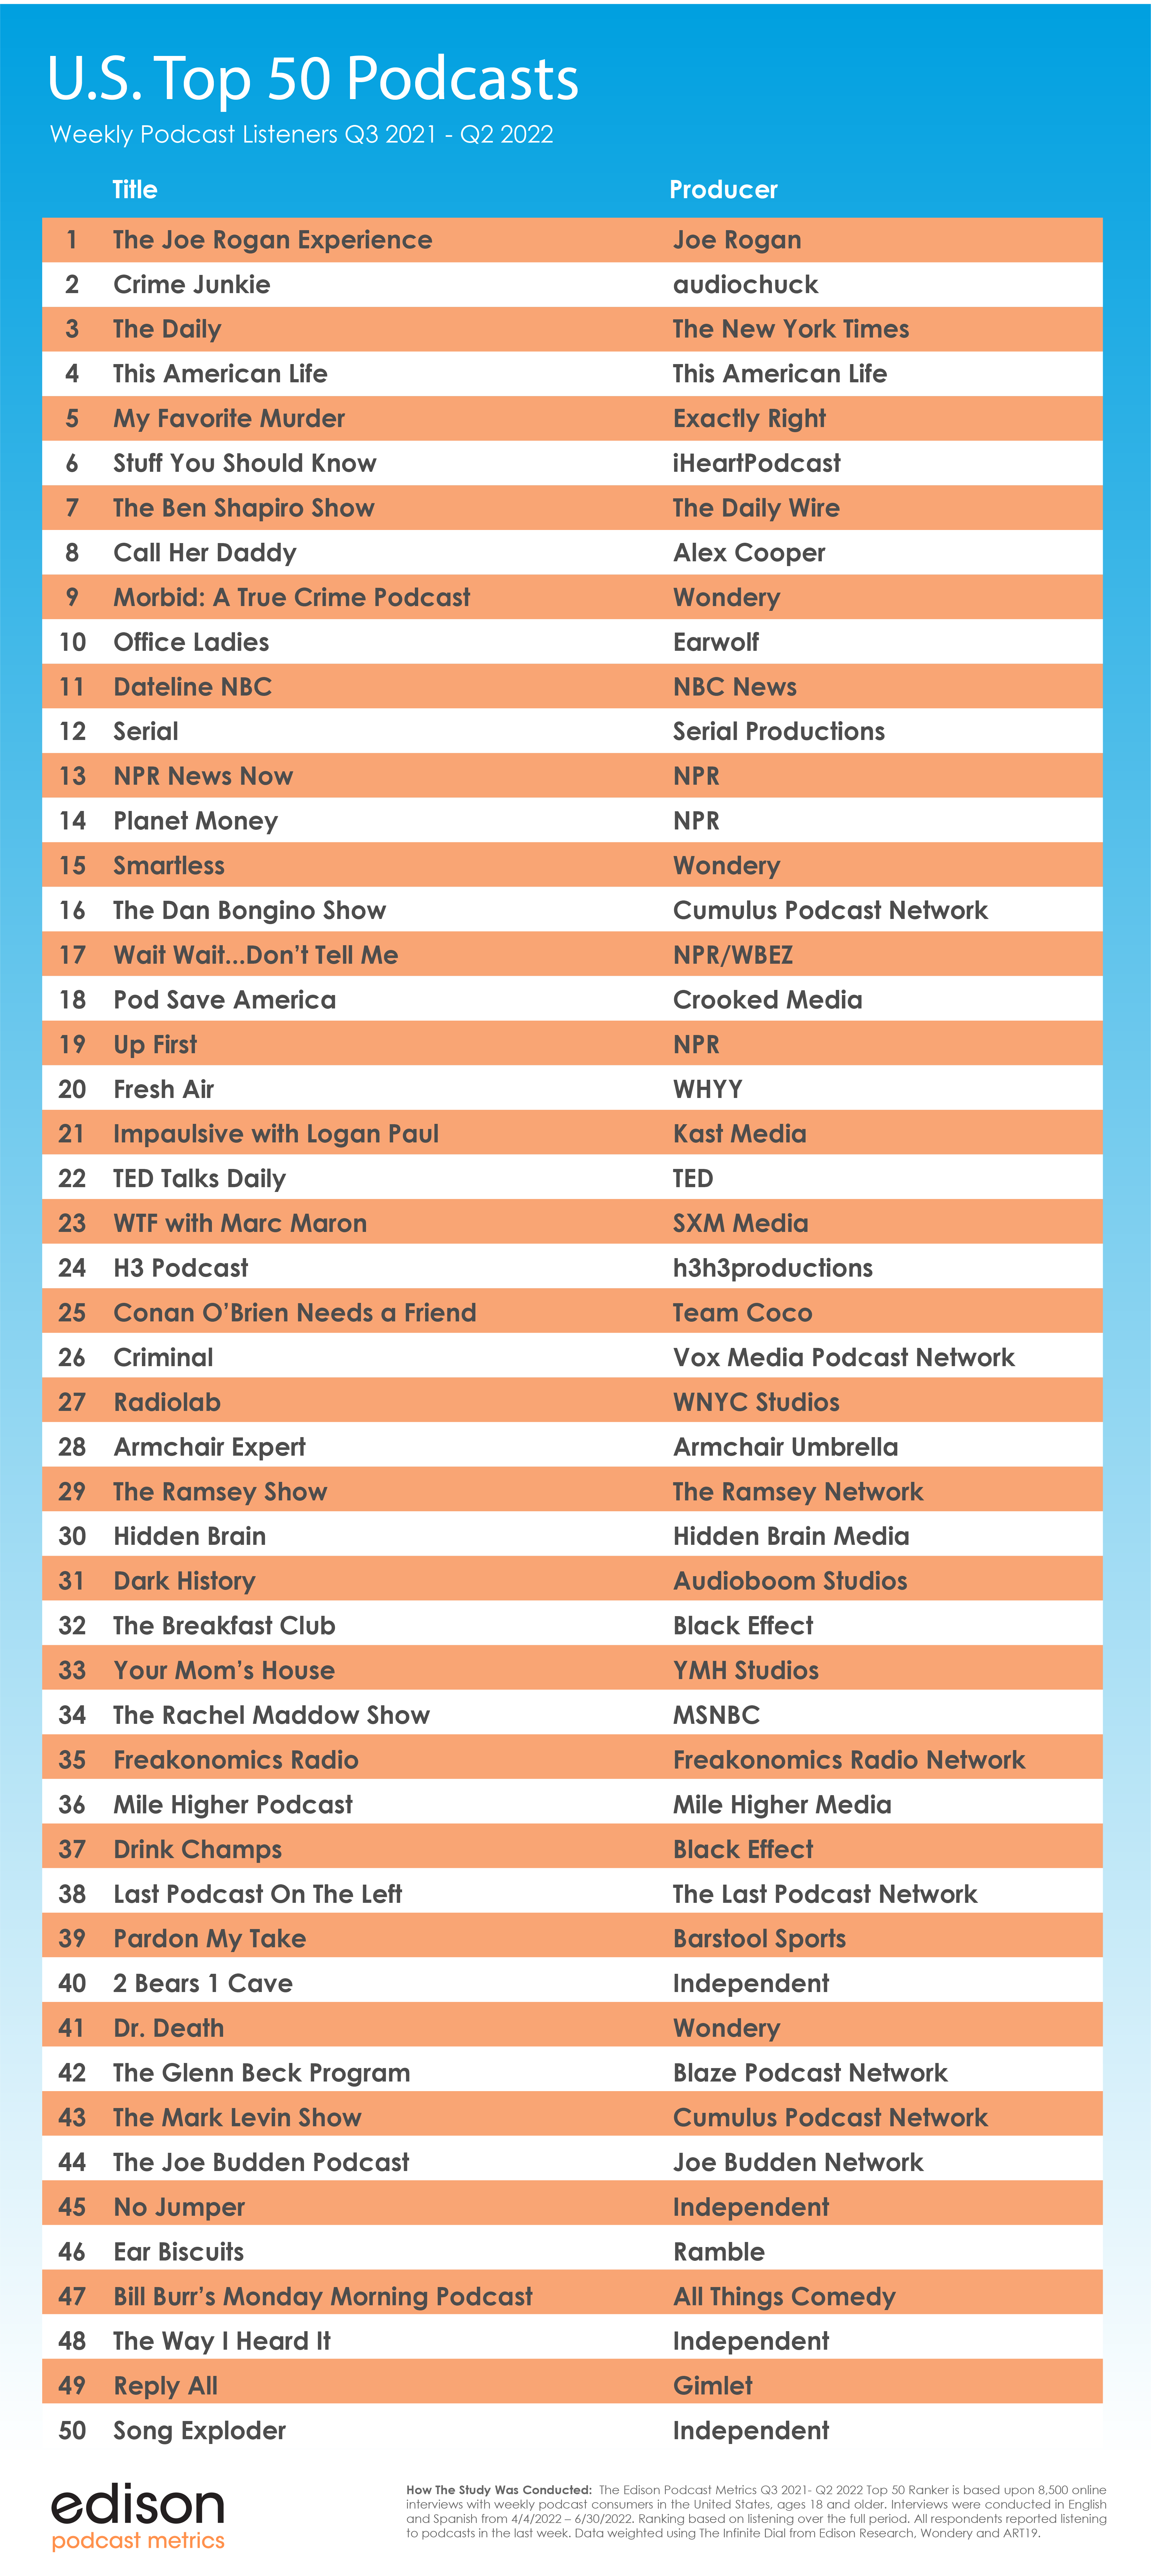 sammenholdt Alfabetisk orden hovedpine Top 50 Most Listened To Podcasts in the U.S. Q2 2022 - Edison Research